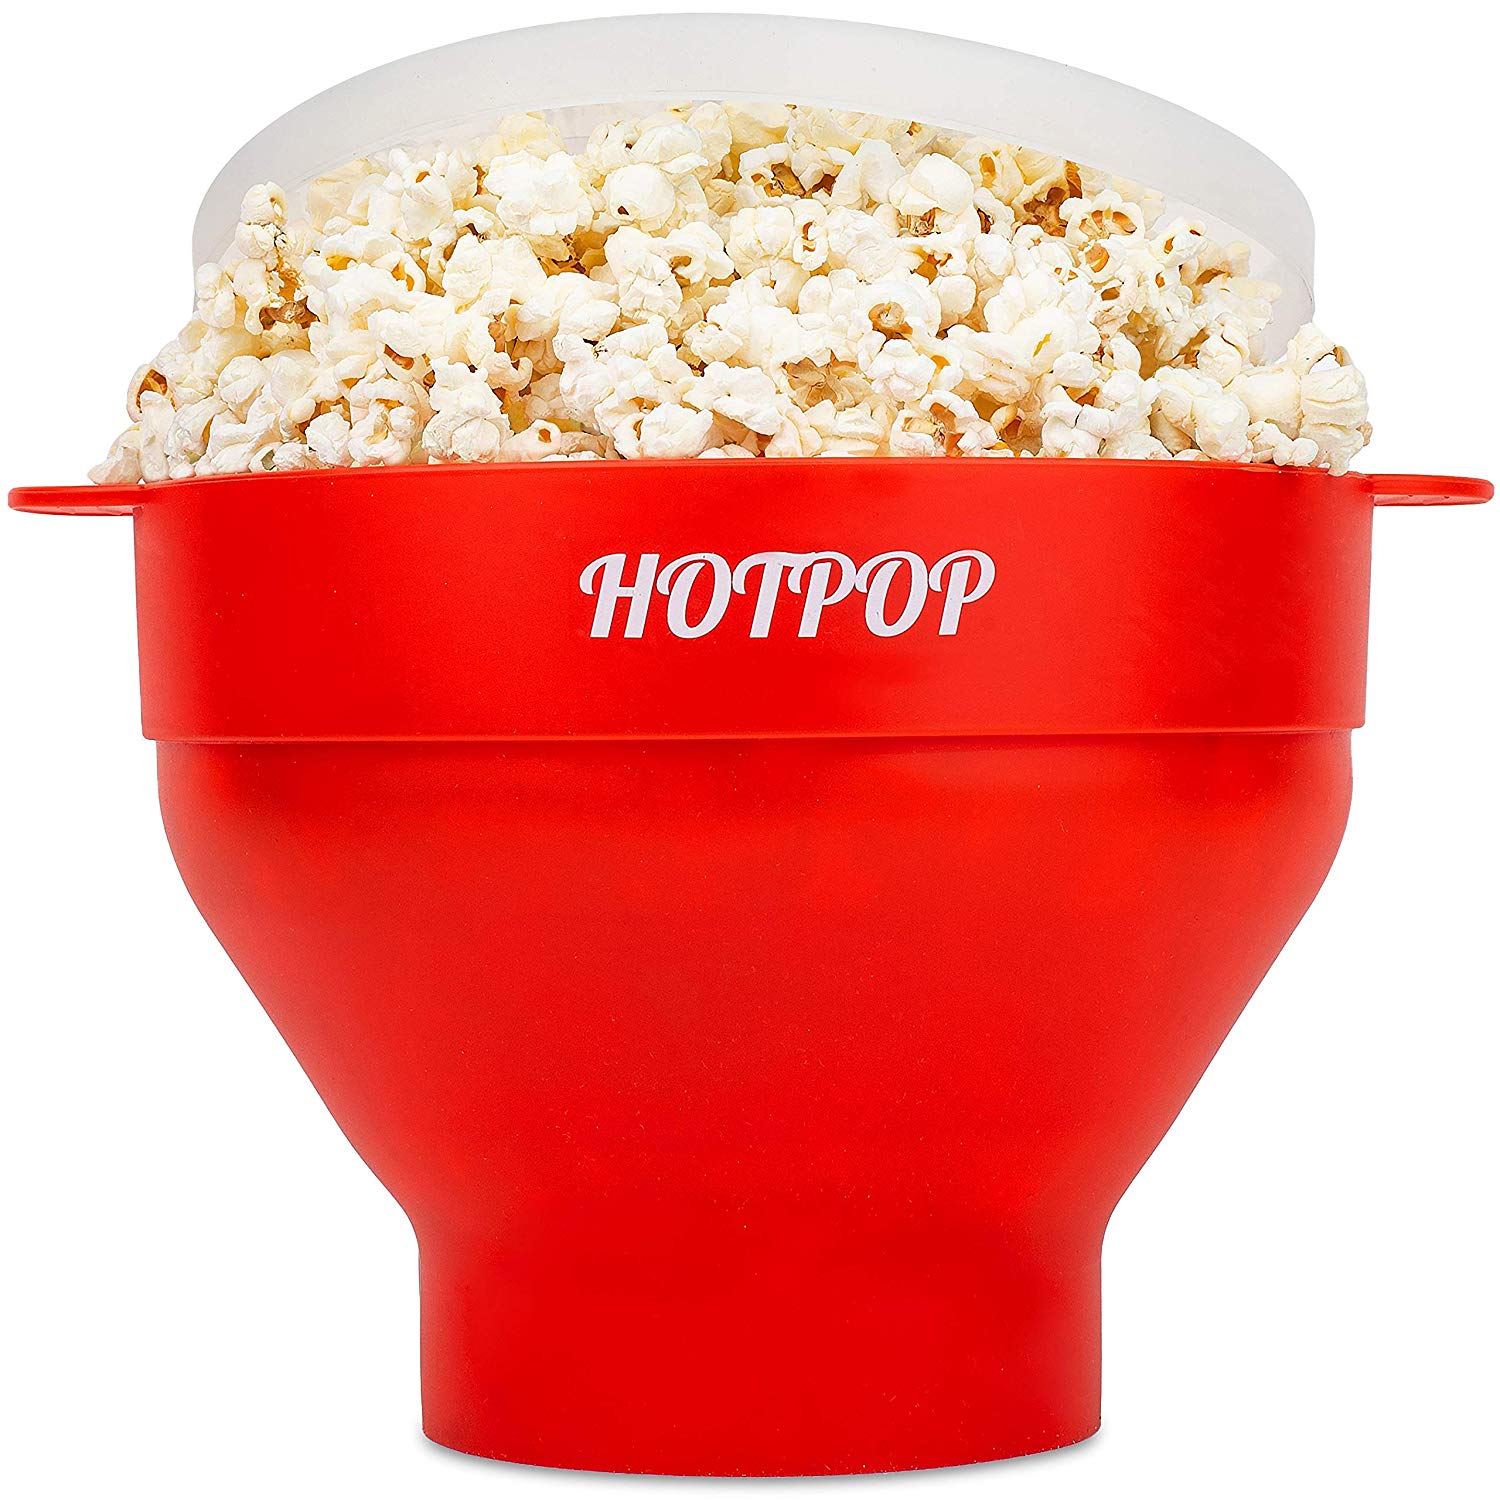 Popcorn Maker Household Supplies Silicone Material,Popcorn Bowl Insulating and Not Easy to Fade for Make Popcorn,for Dishwasher and Microwave 